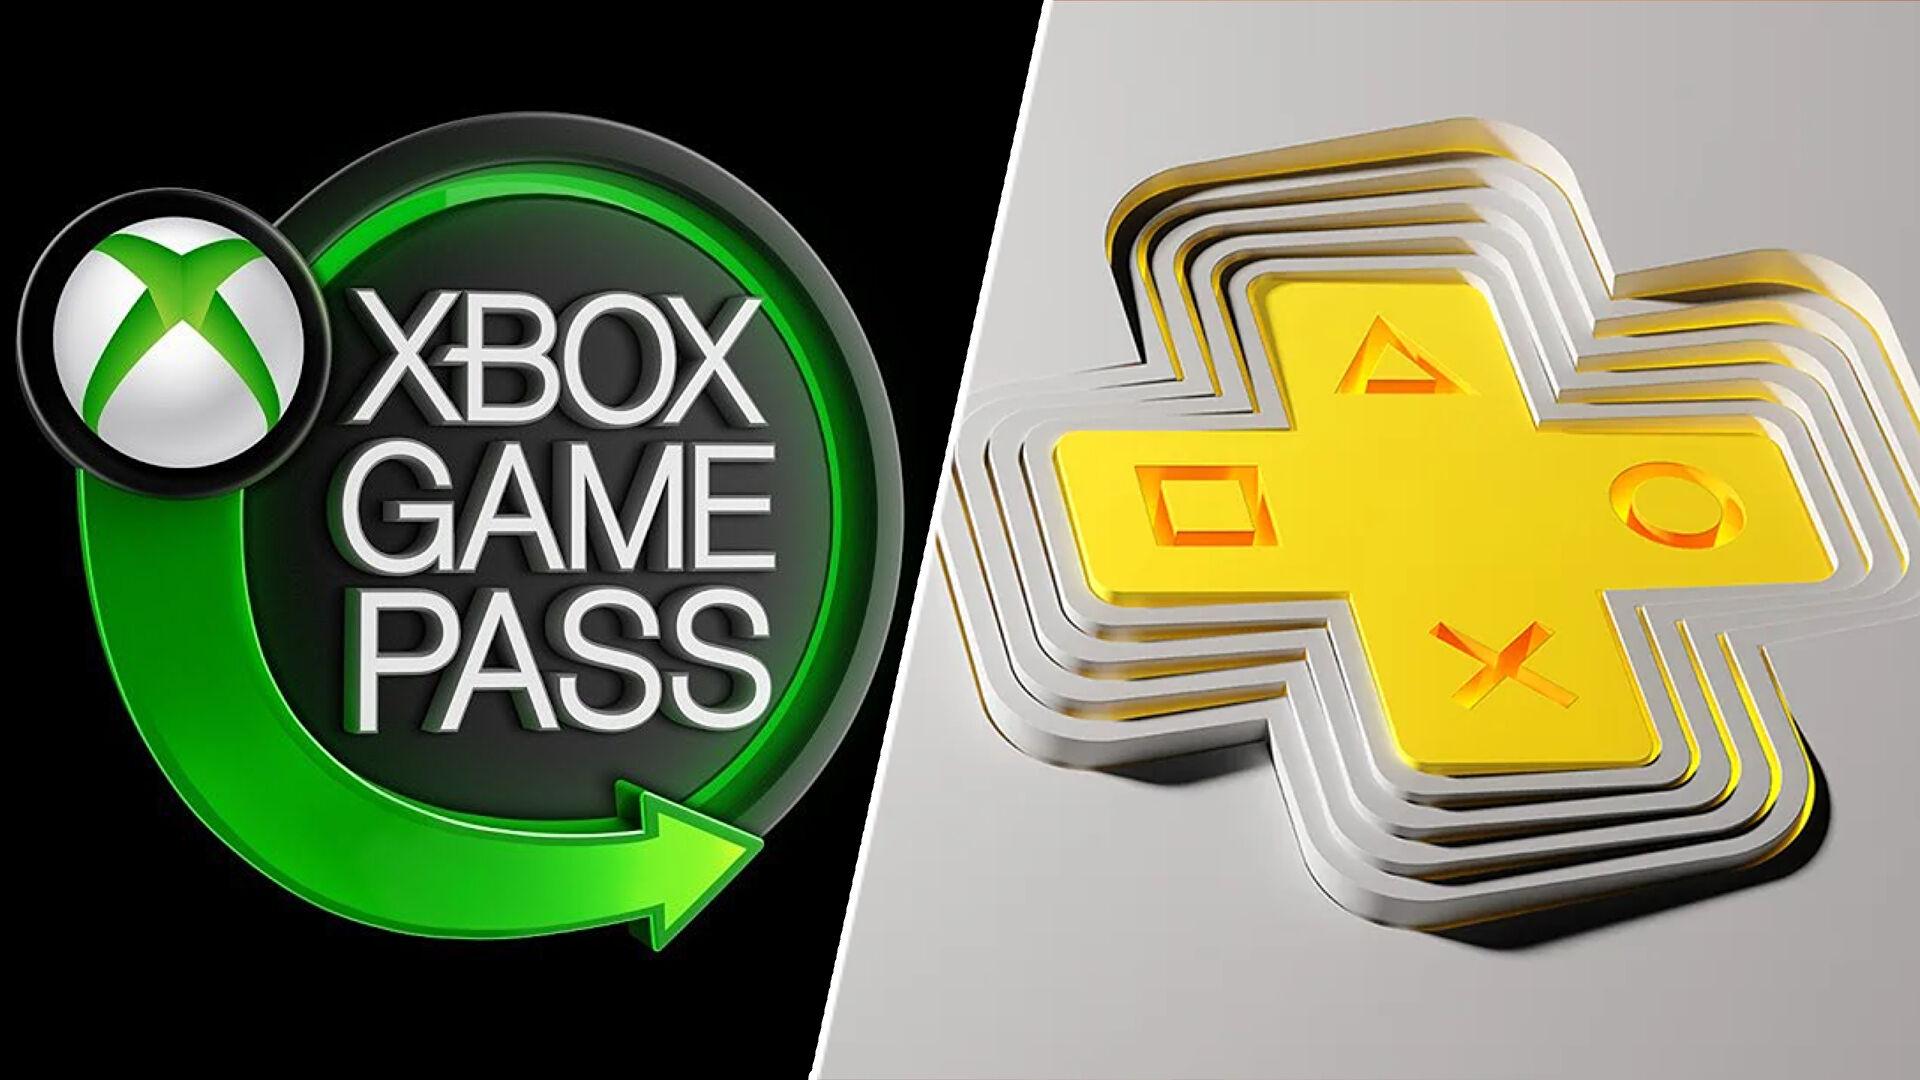 Even though PlayStation is losing PS Plus subs, Sony’s service still outnumbers Xbox Game Pass